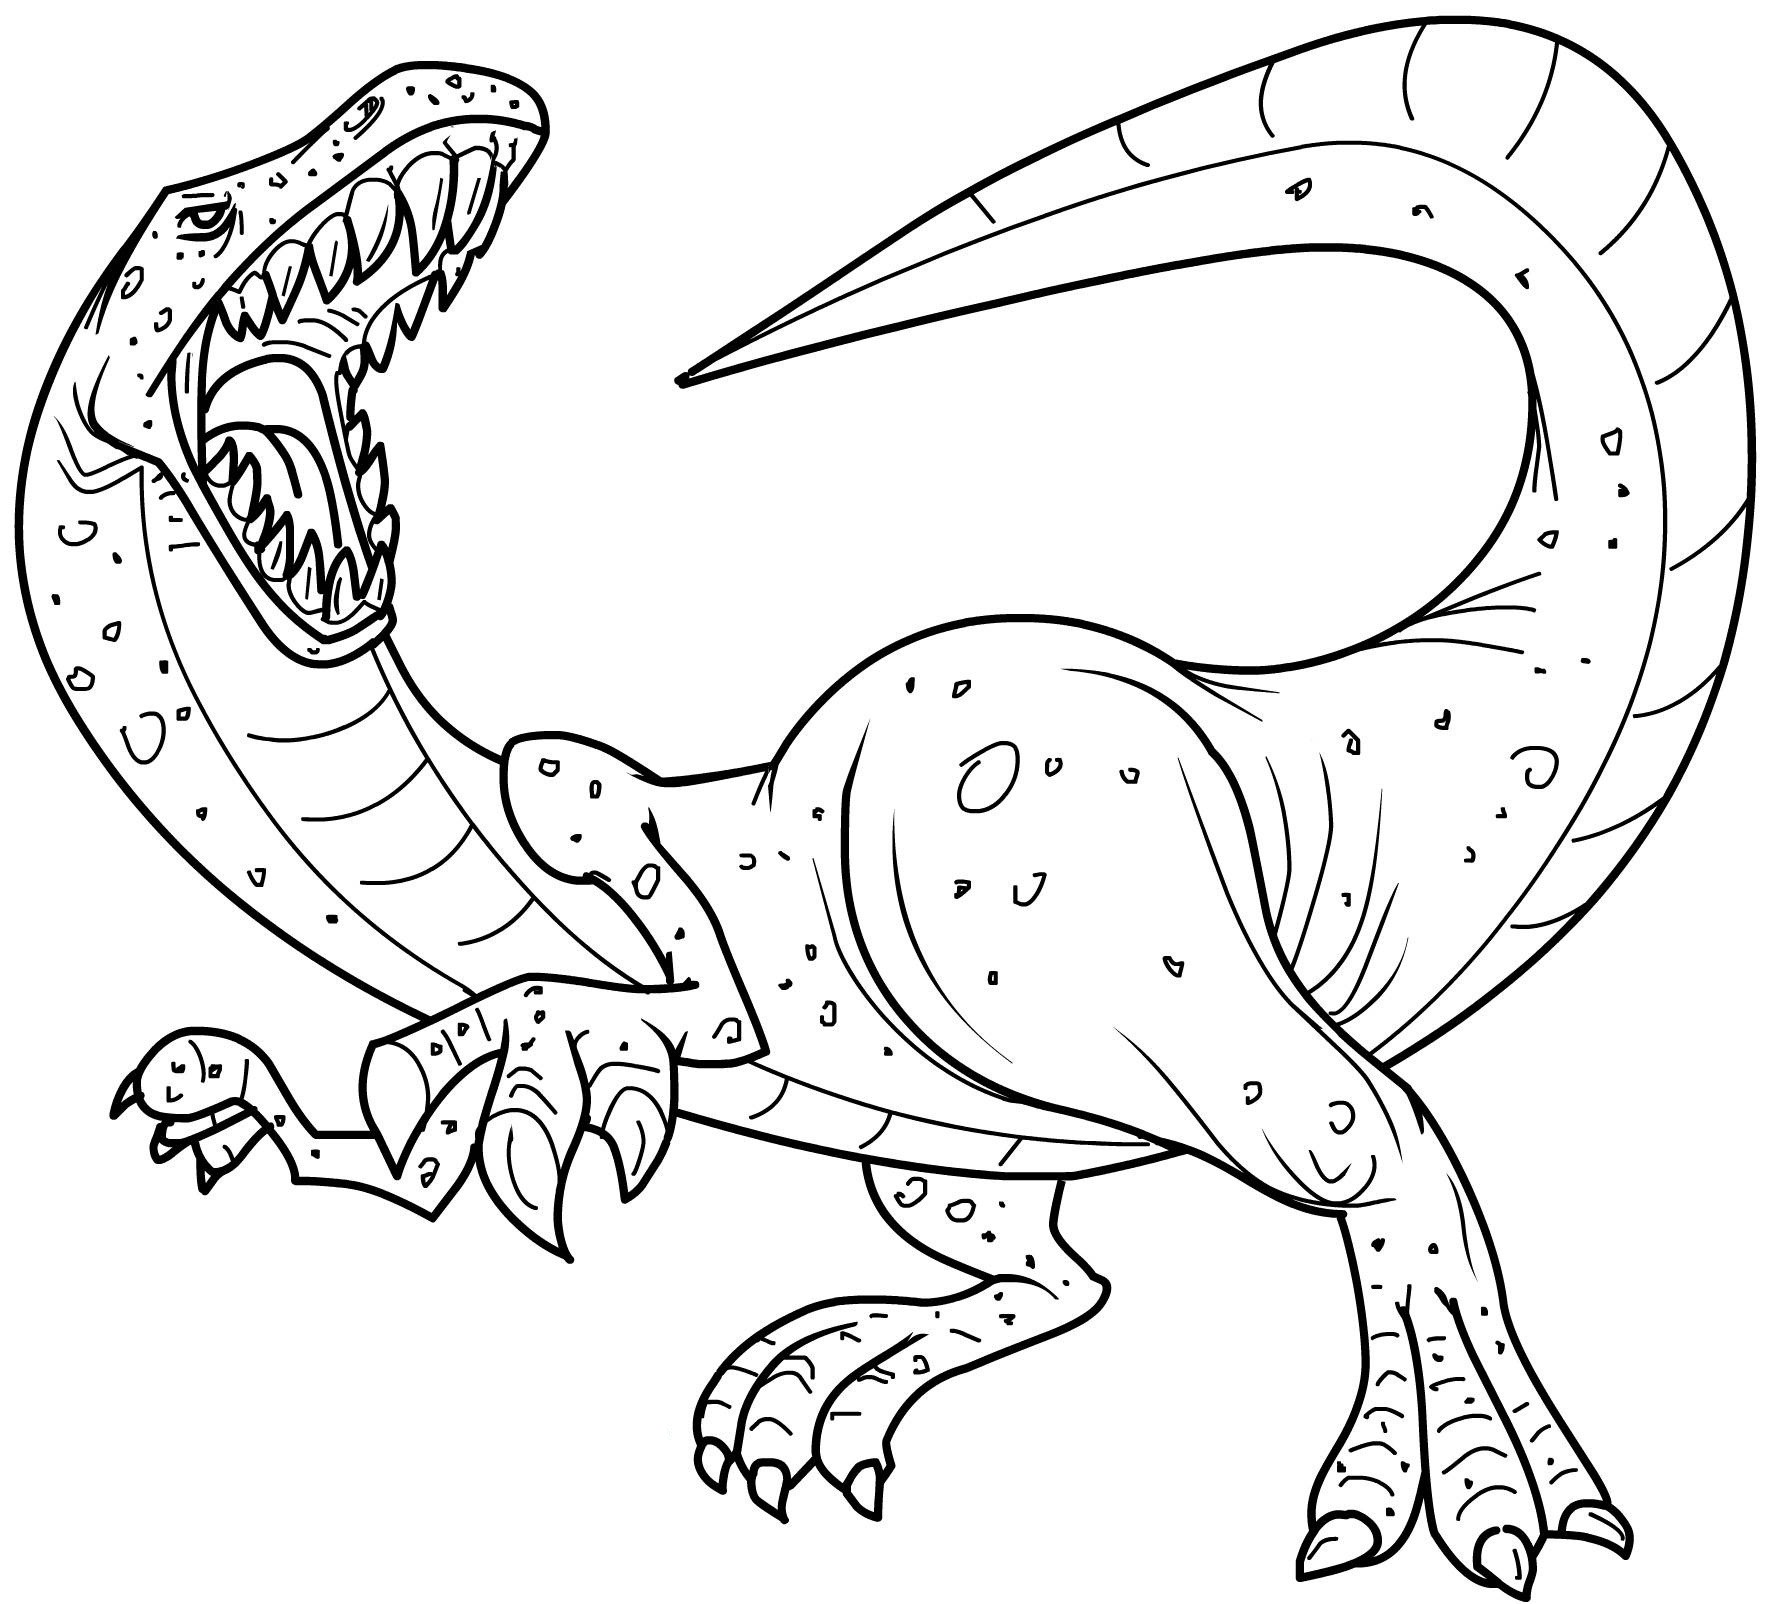 932 Animal Printable Free Dinosaur Coloring Pages for Adult